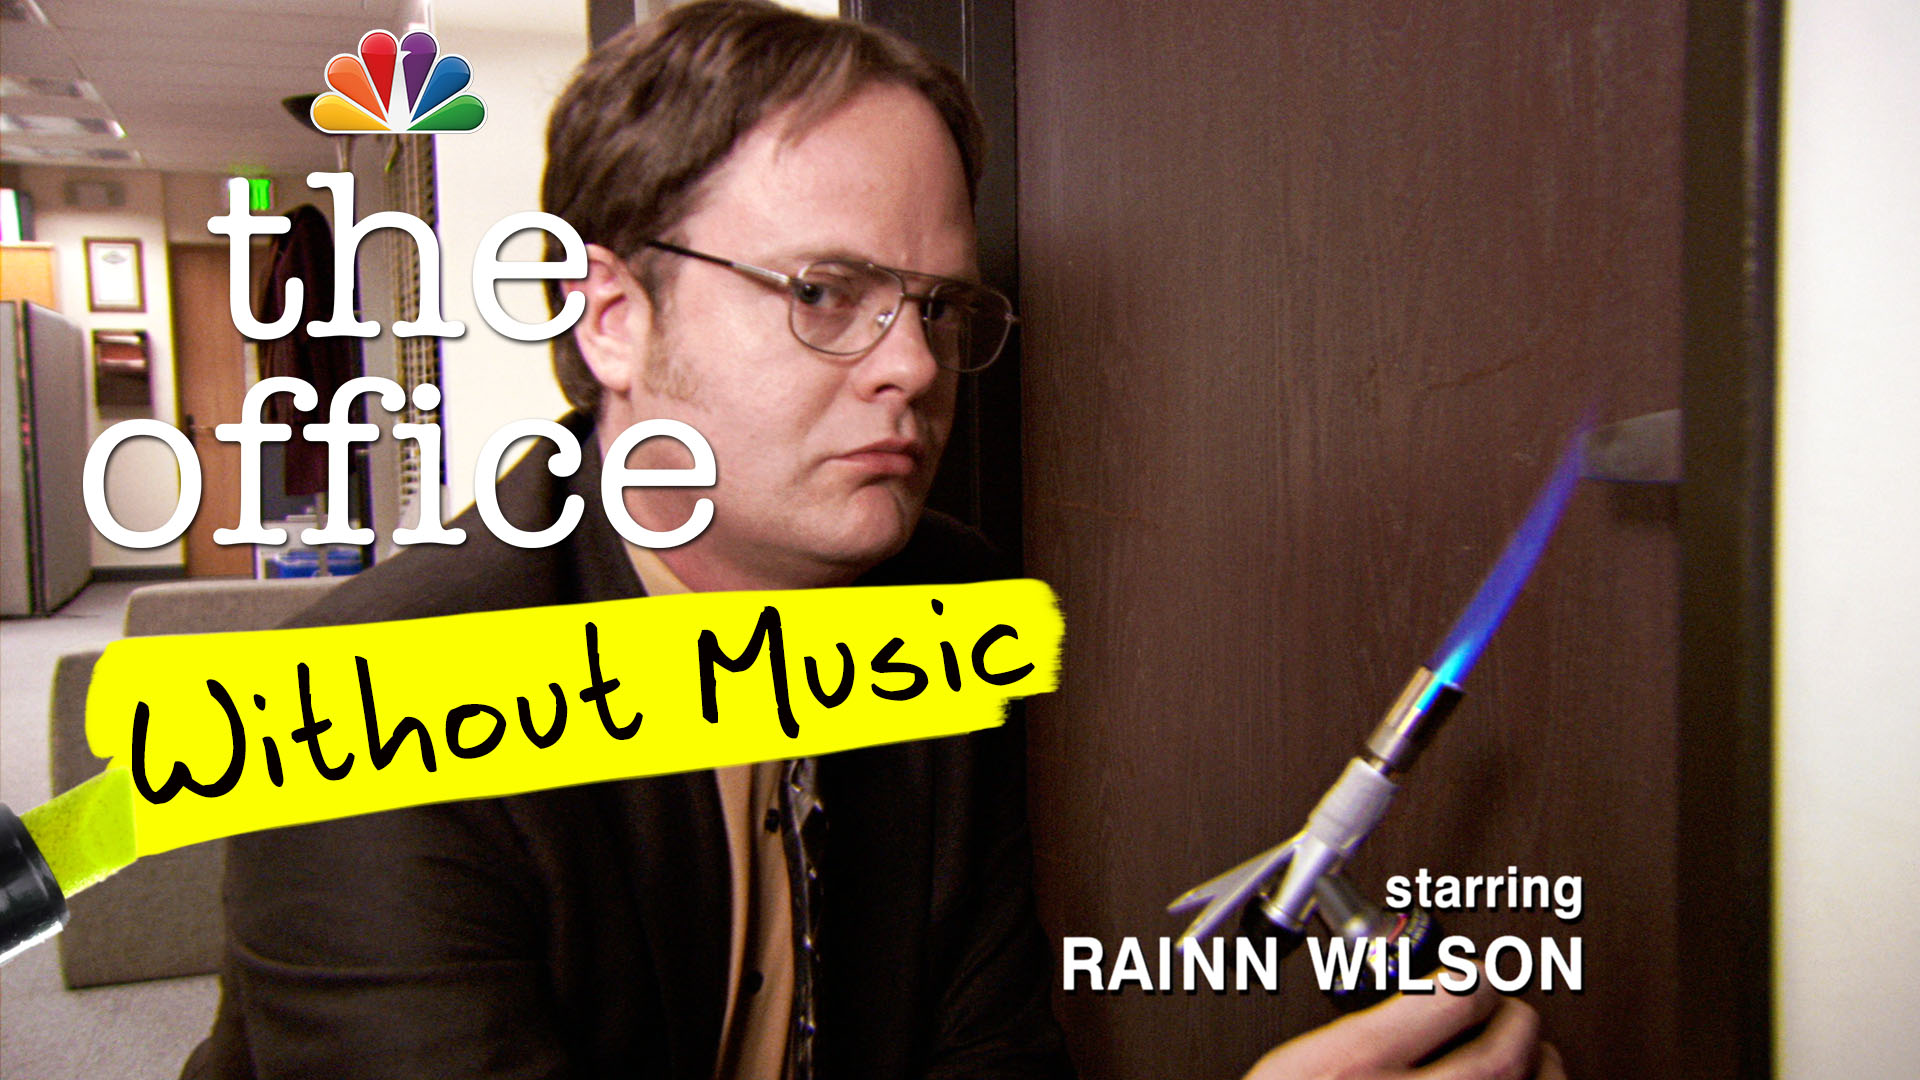 watch-the-office-web-exclusive-the-office-intro-without-music-season-9-the-office-nbc